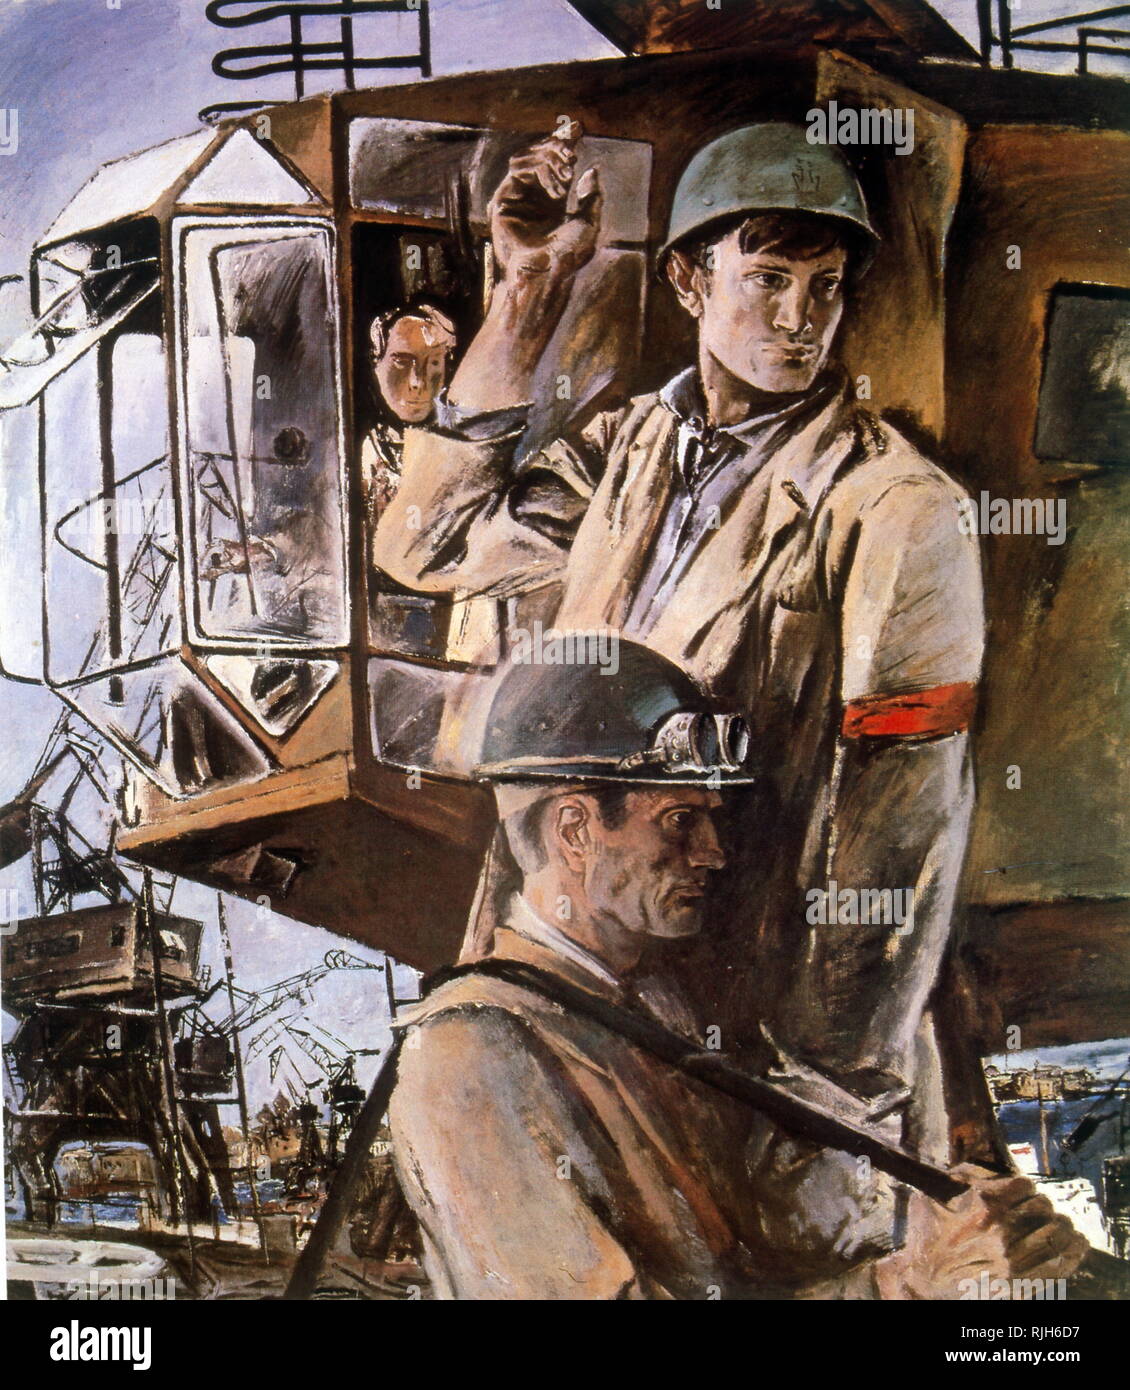 Naval construction workers in the soviet union. 1974. Painting by Grigory Fadin Stock Photo